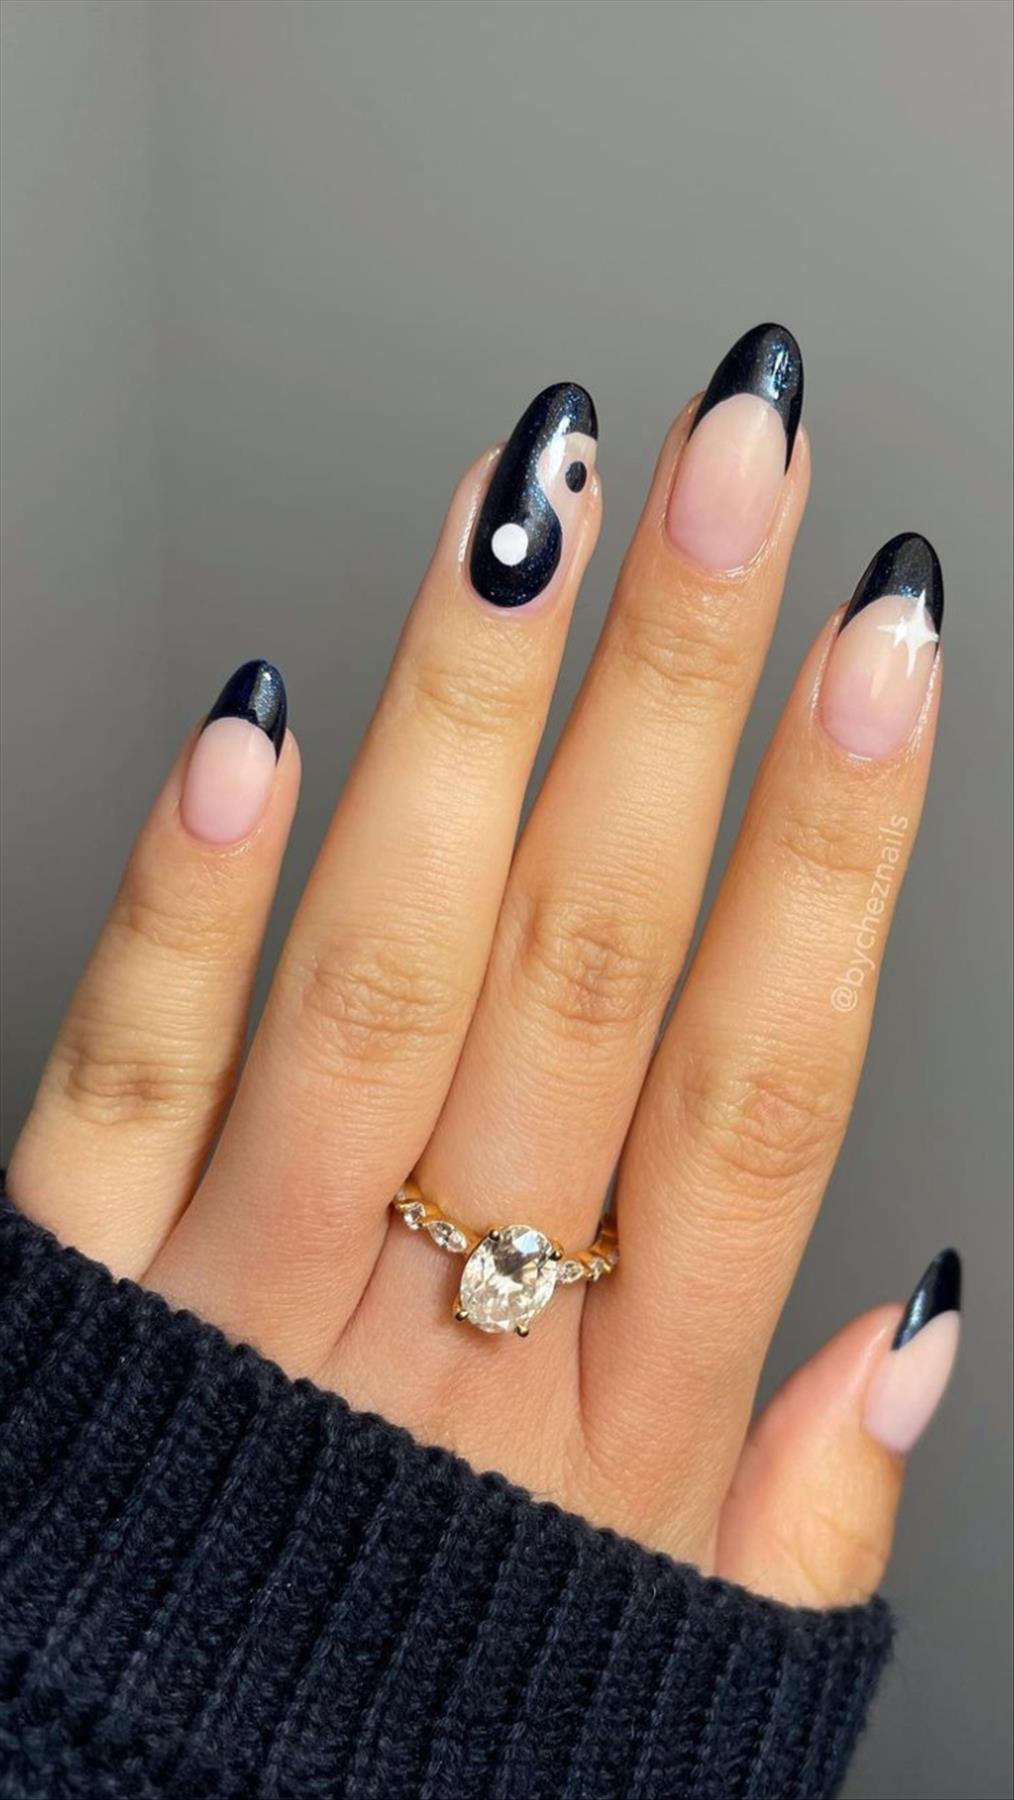 Cool black nail design for winter nails